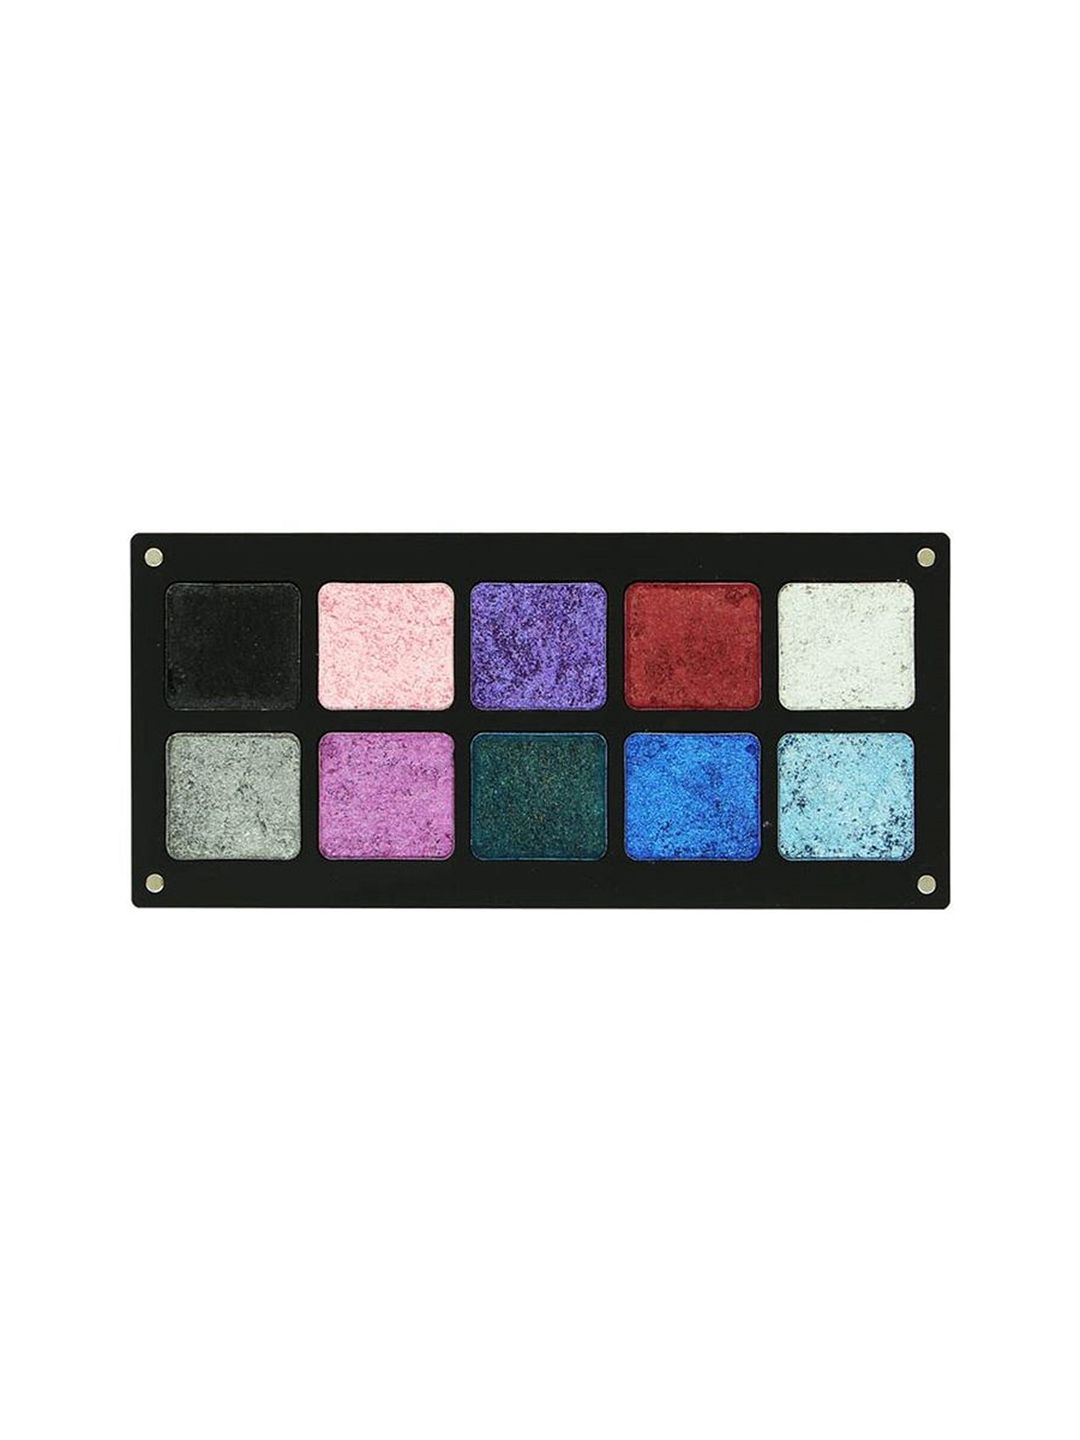 Fashion Colour Artistry 10 Shades Eyeshadow Palette 35 g - CE01 Price in India